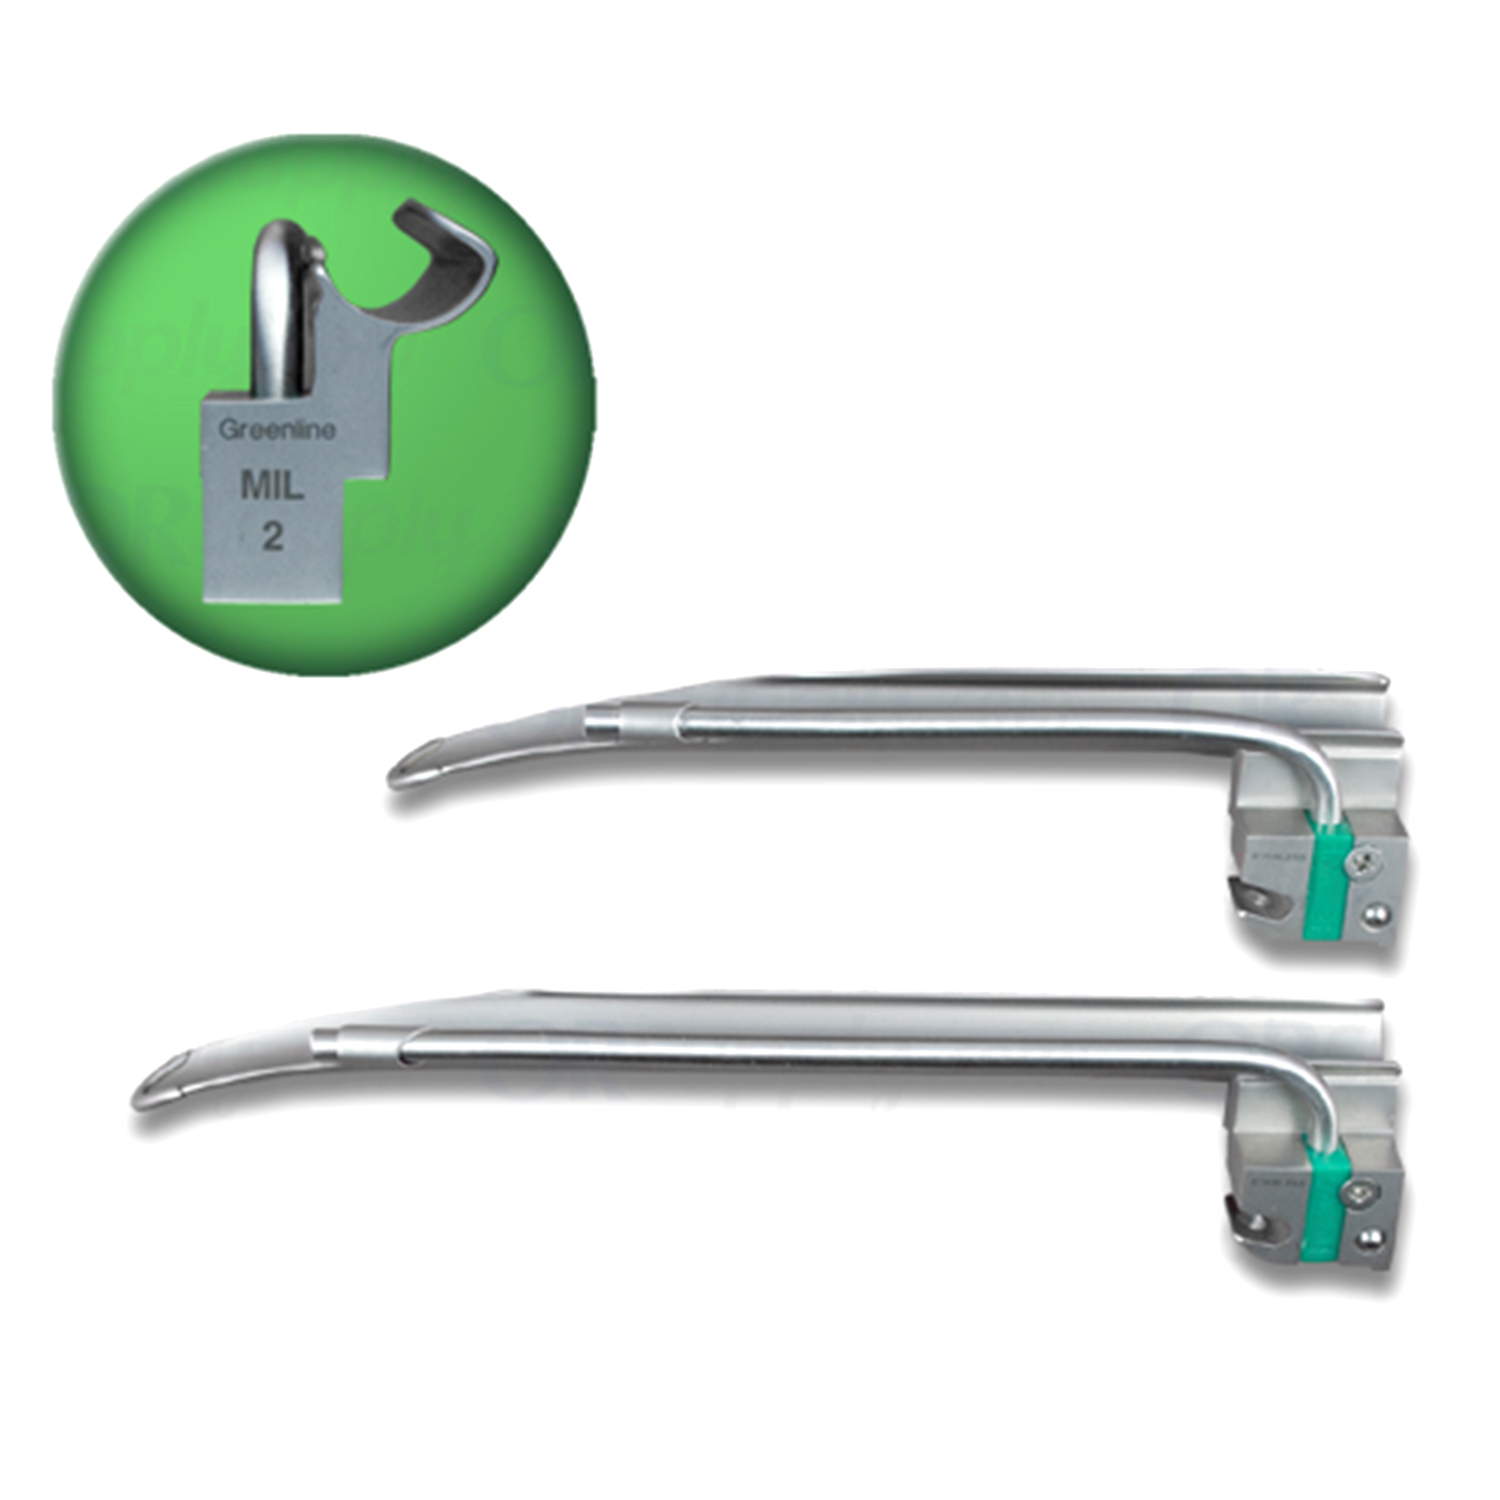 Greenline Miller English Profile Blade Size 2 (Child) - Light on Right Side in User Position